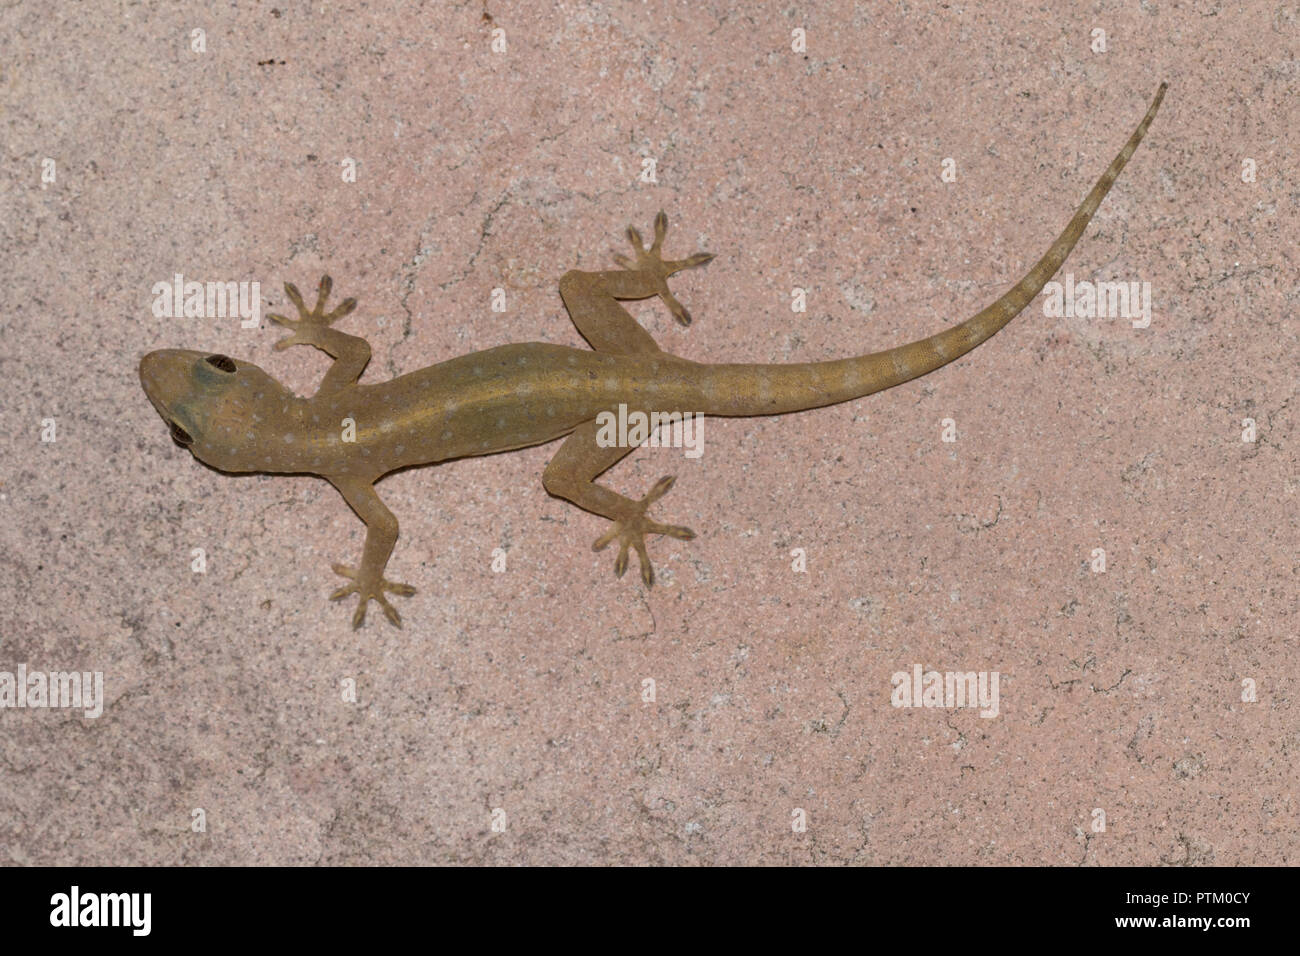 Common four-clawed gecko (Gehyra mutilata) on house wall, Isaan, Thailand Stock Photo